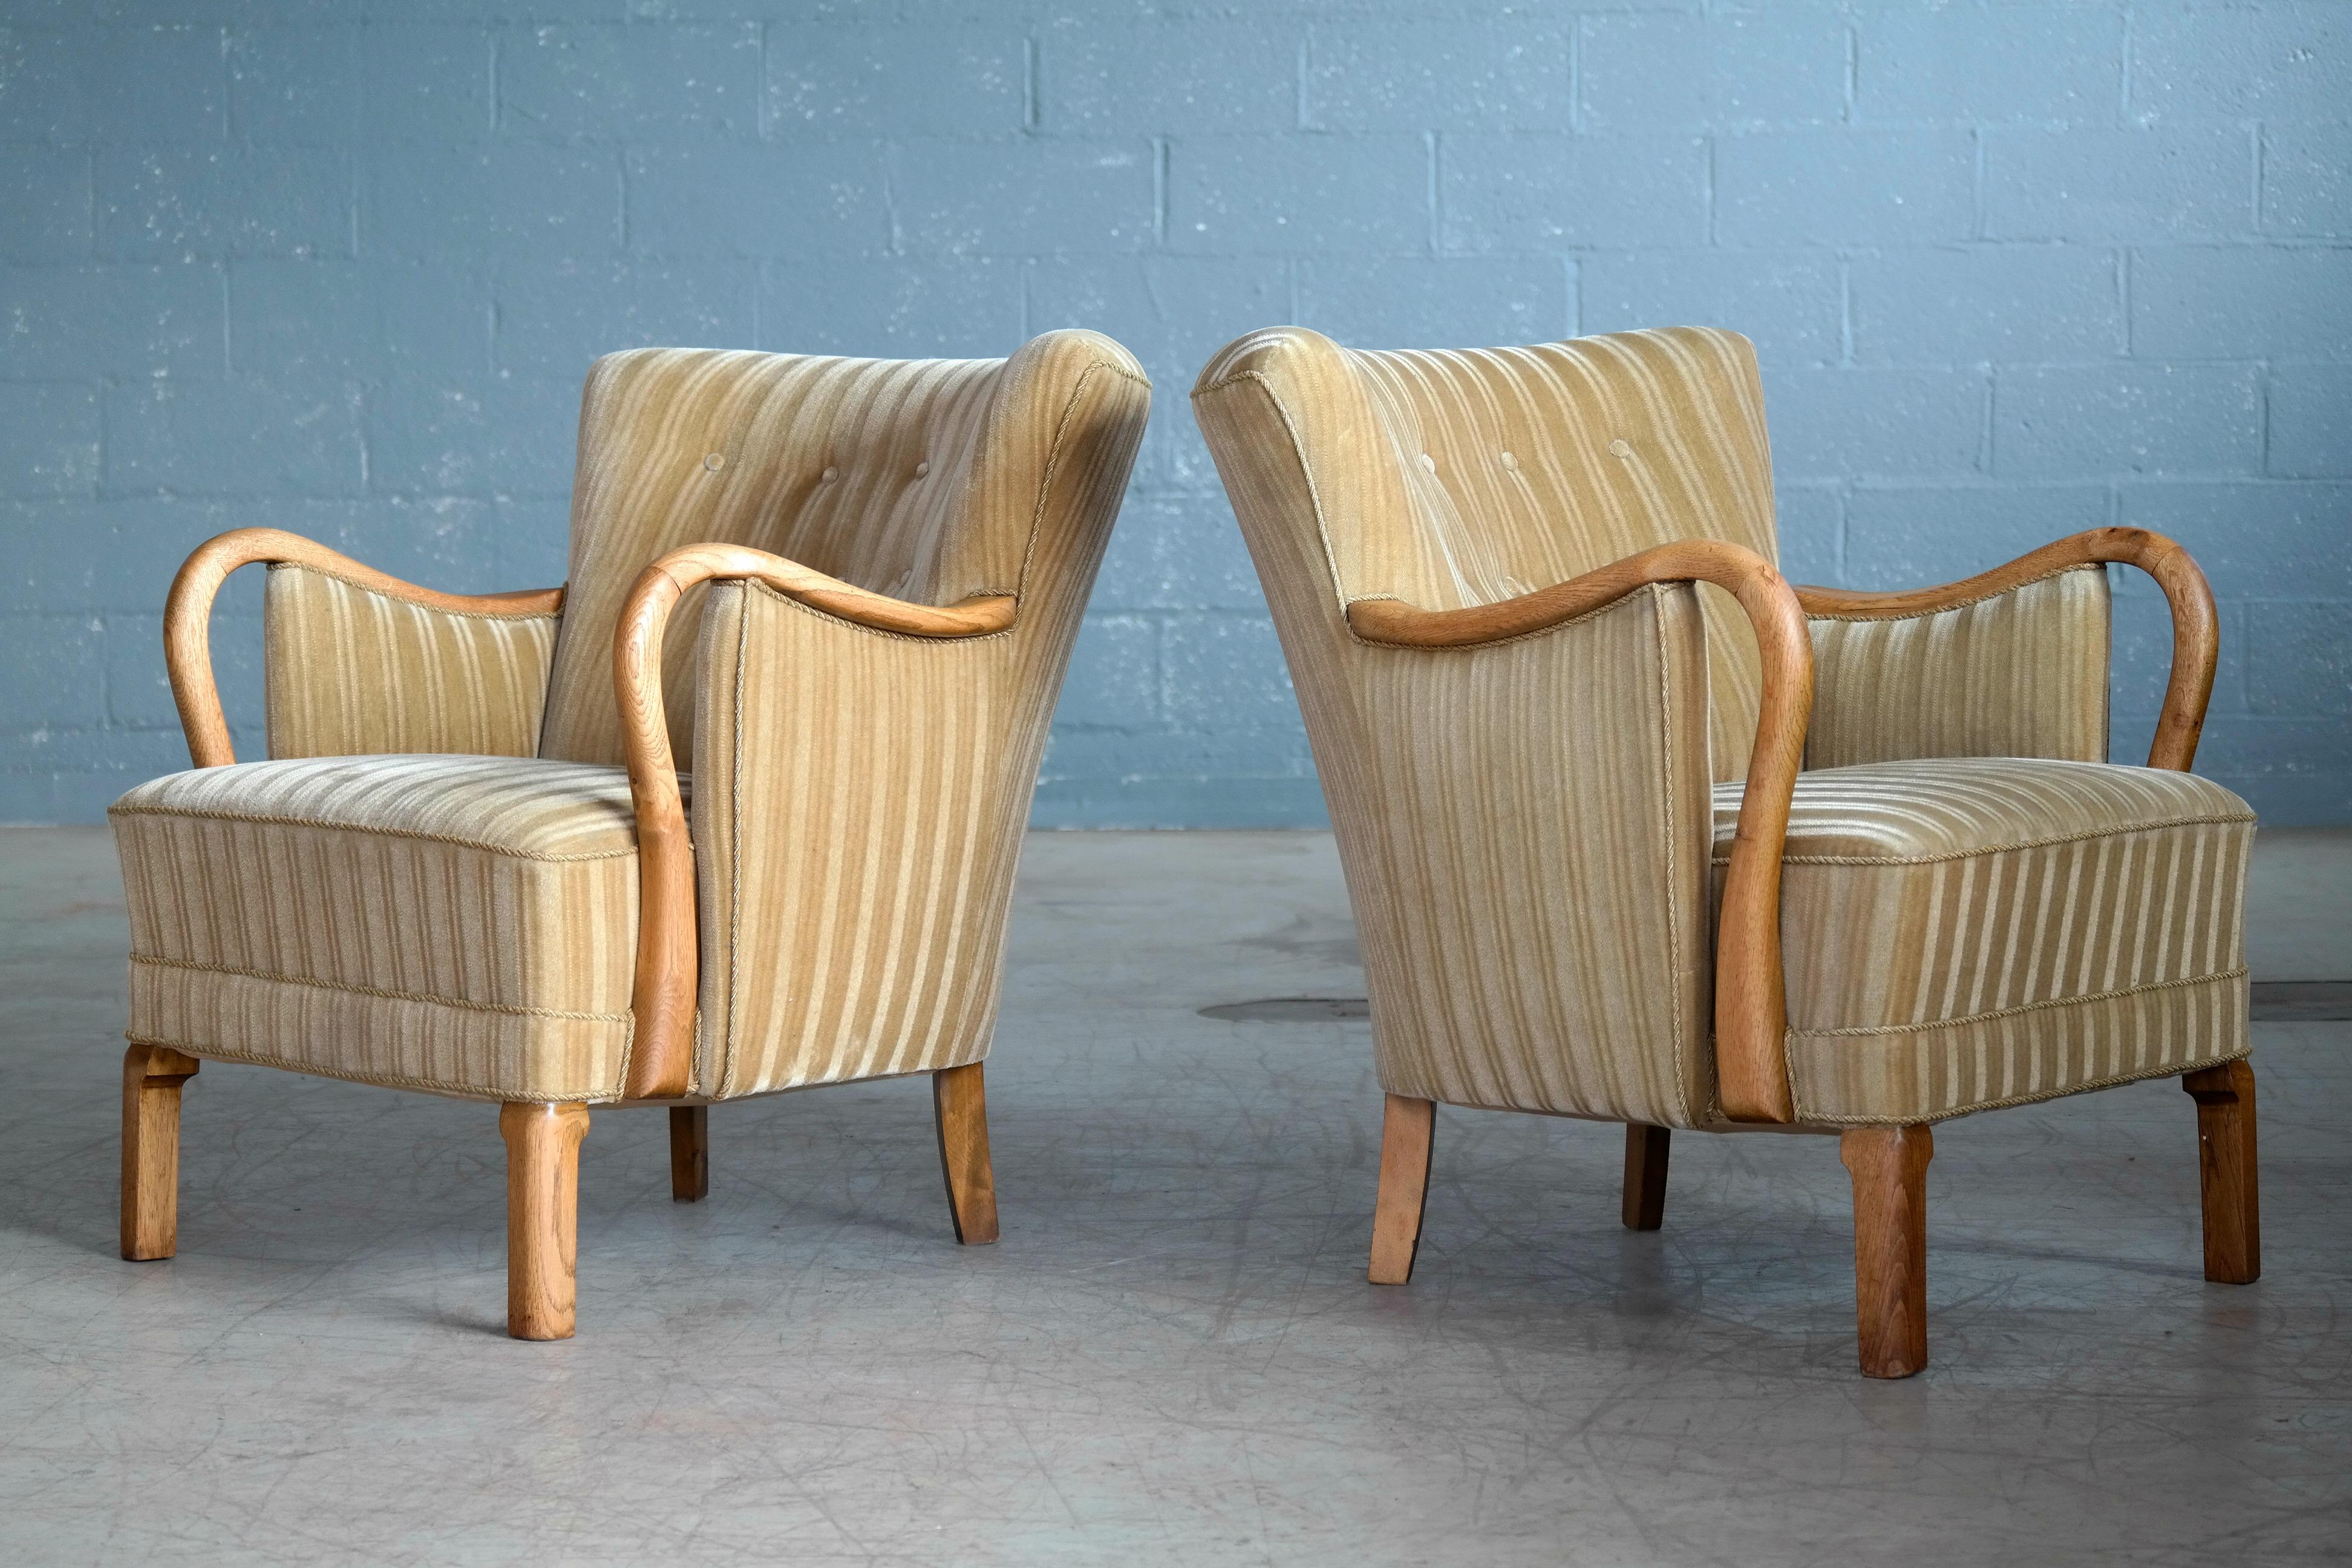 Sublime pair of lounge chairs made by Slagelse Mobelvaerk of Denmark in the 1940s with the design attributed to Viggo Boesen. These elegant chairs display the same leg design seen on other of Boesen chairs and the wooden armrests in solid oak are